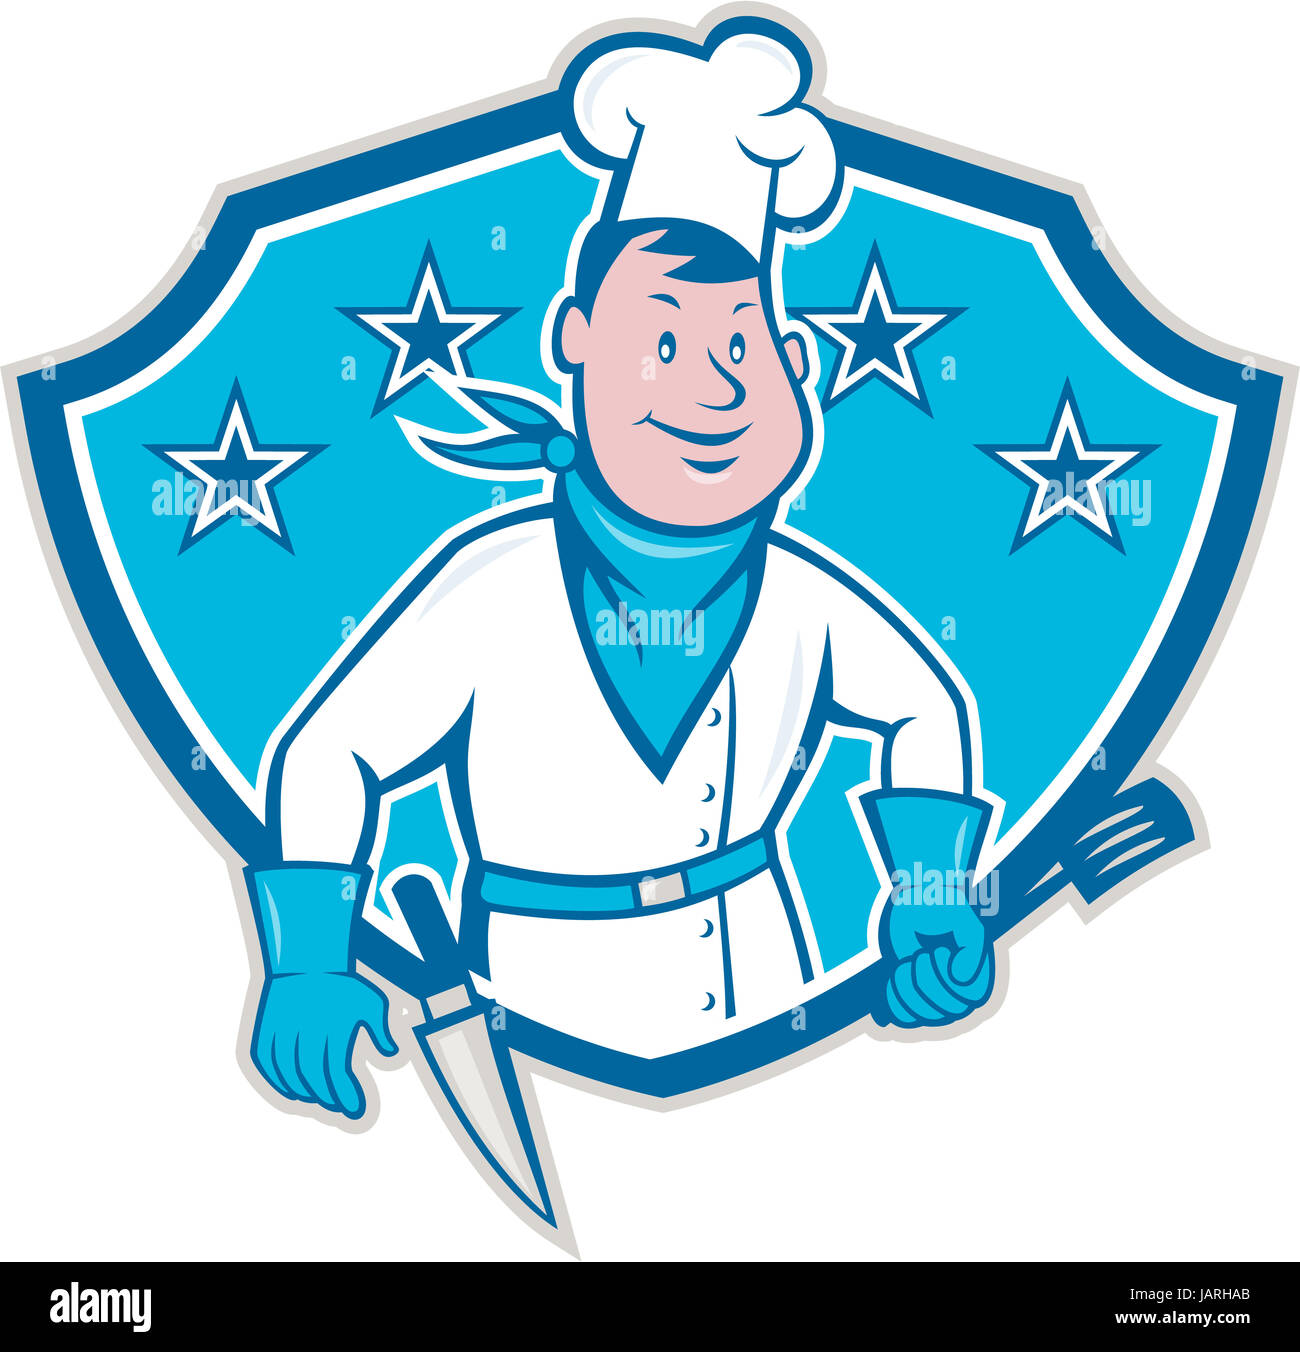 Illustration of a chef cook with spatula and kitchen knife on hip wearing bandana on neck and facing front set inside shield with stars done in cartoon style. Stock Photo